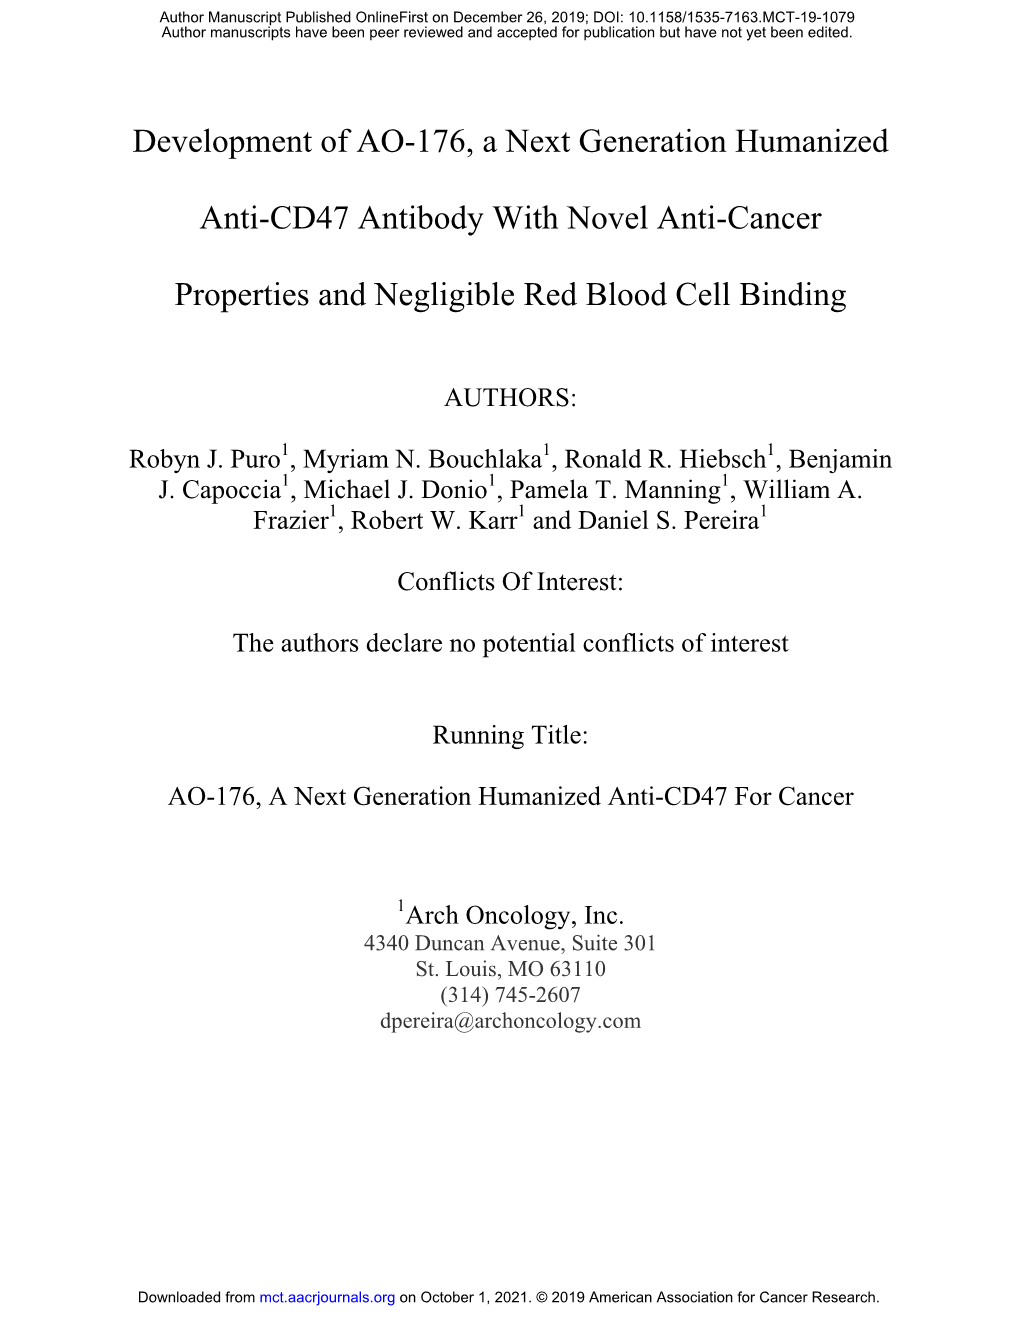 Development of AO-176, a Next Generation Humanized Anti-CD47 Antibody with Novel Anti-Cancer Properties and Negligible Red Blood Cell Binding